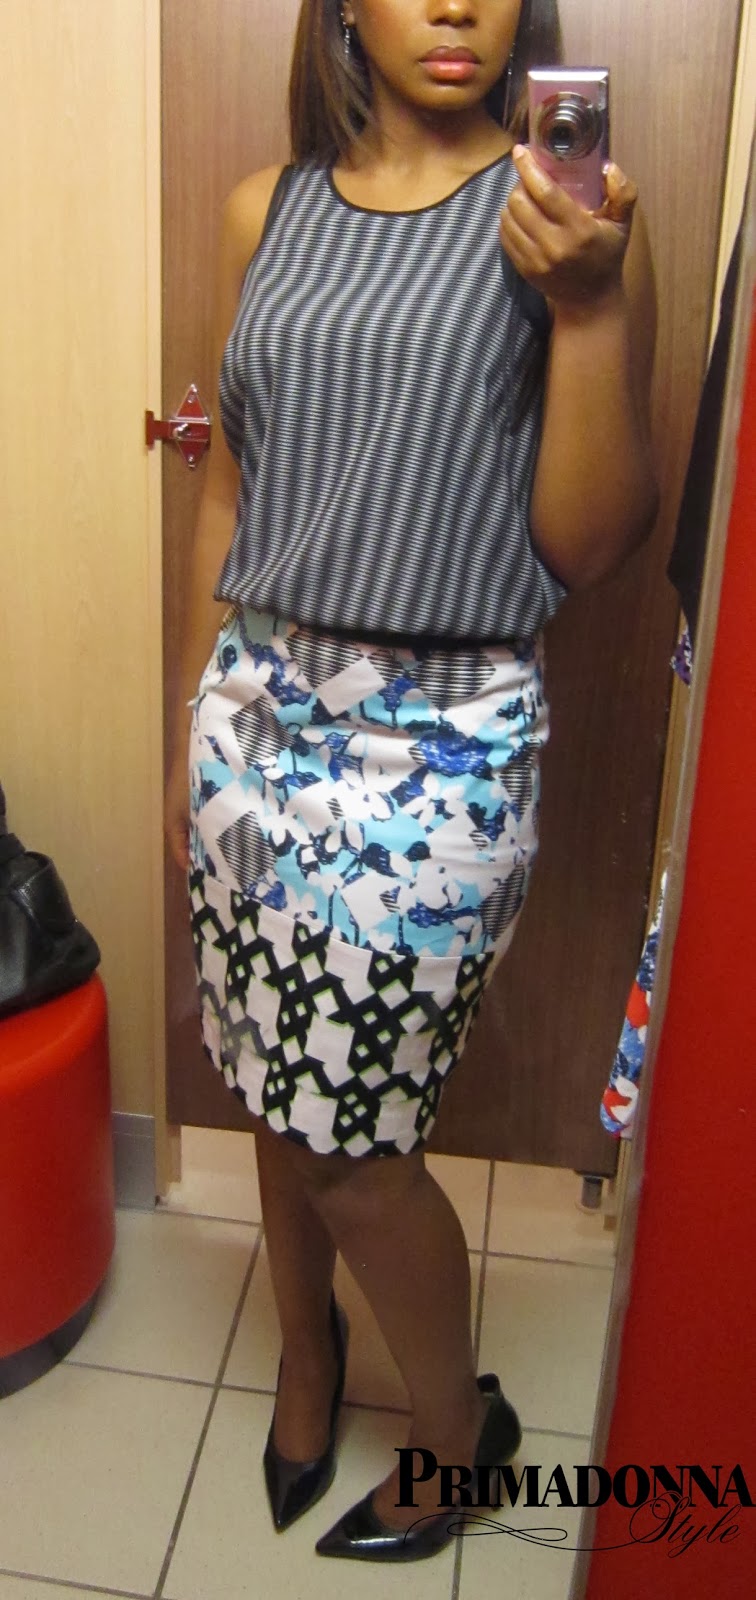 Primadonna Style: Peter Pilotto for Target: Fitting Room Reviews